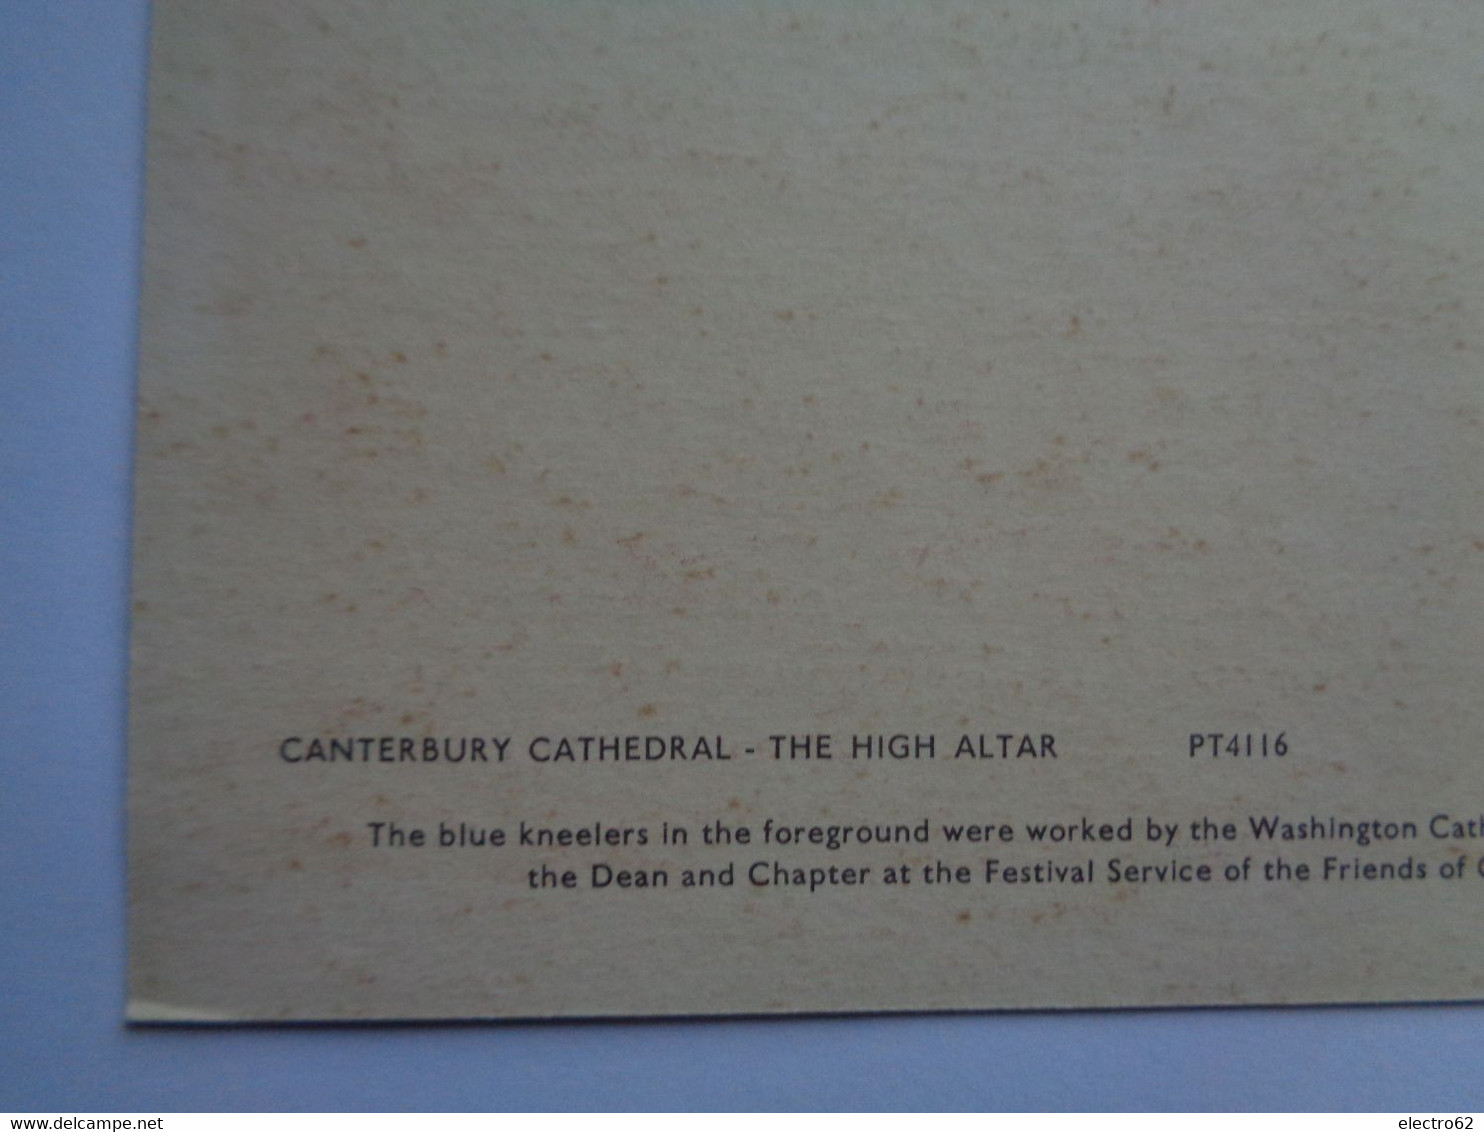 Angleterre Canterbury Cathedral the high Altar  Royaume-Uni  Great Briain UK cathédrale